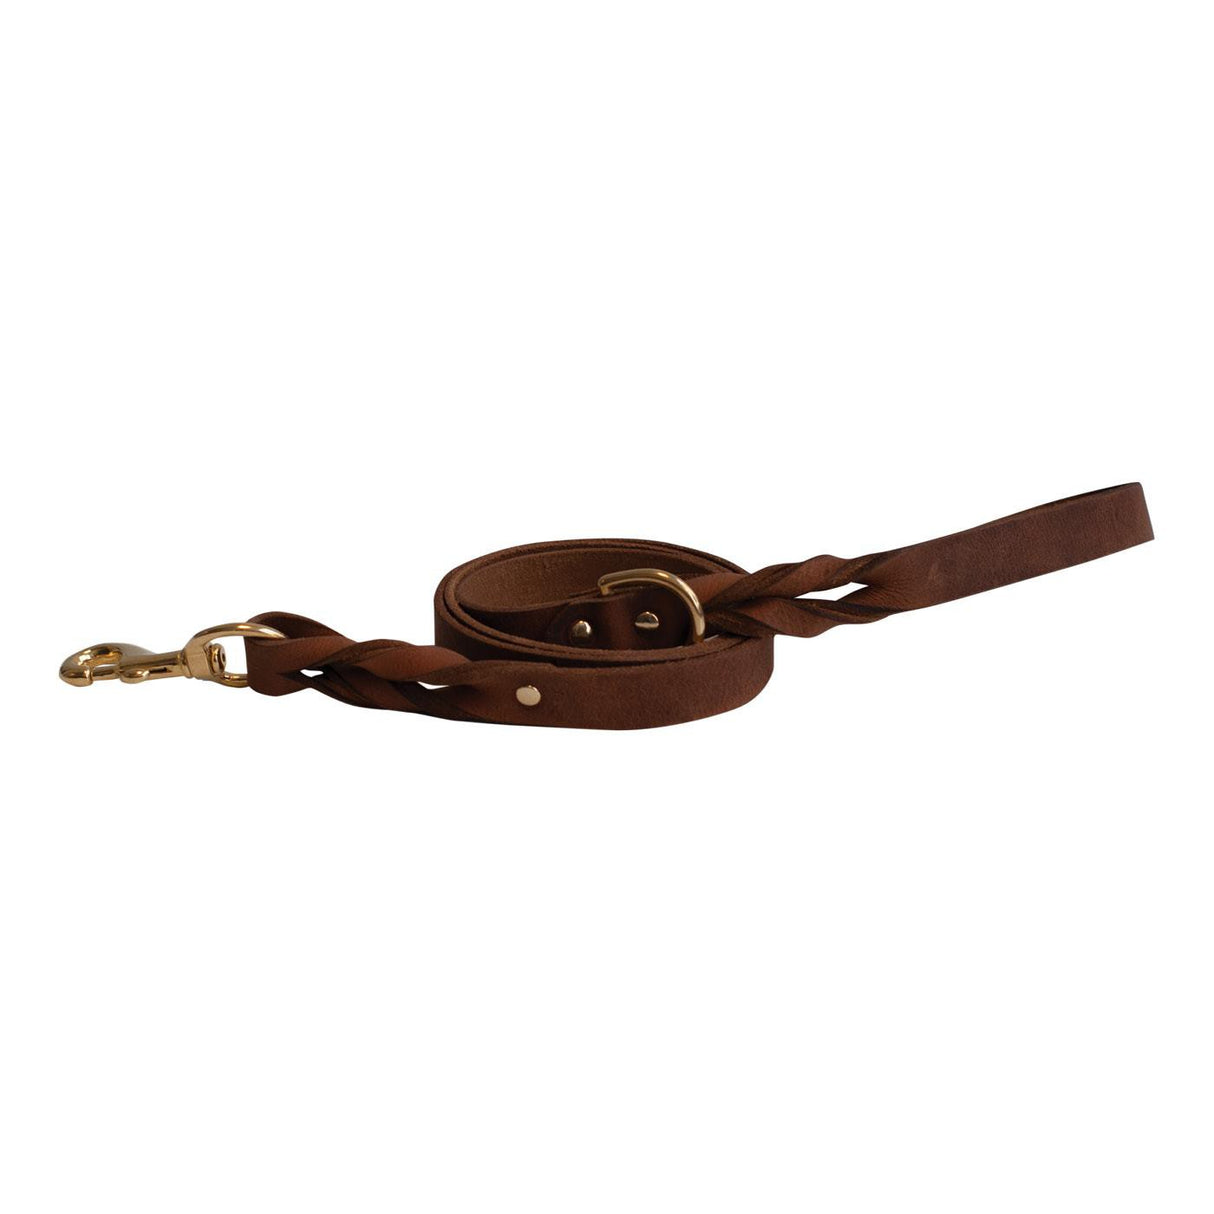 Shedrow K9 Bristol Twisted Leather Leash 5 ft.